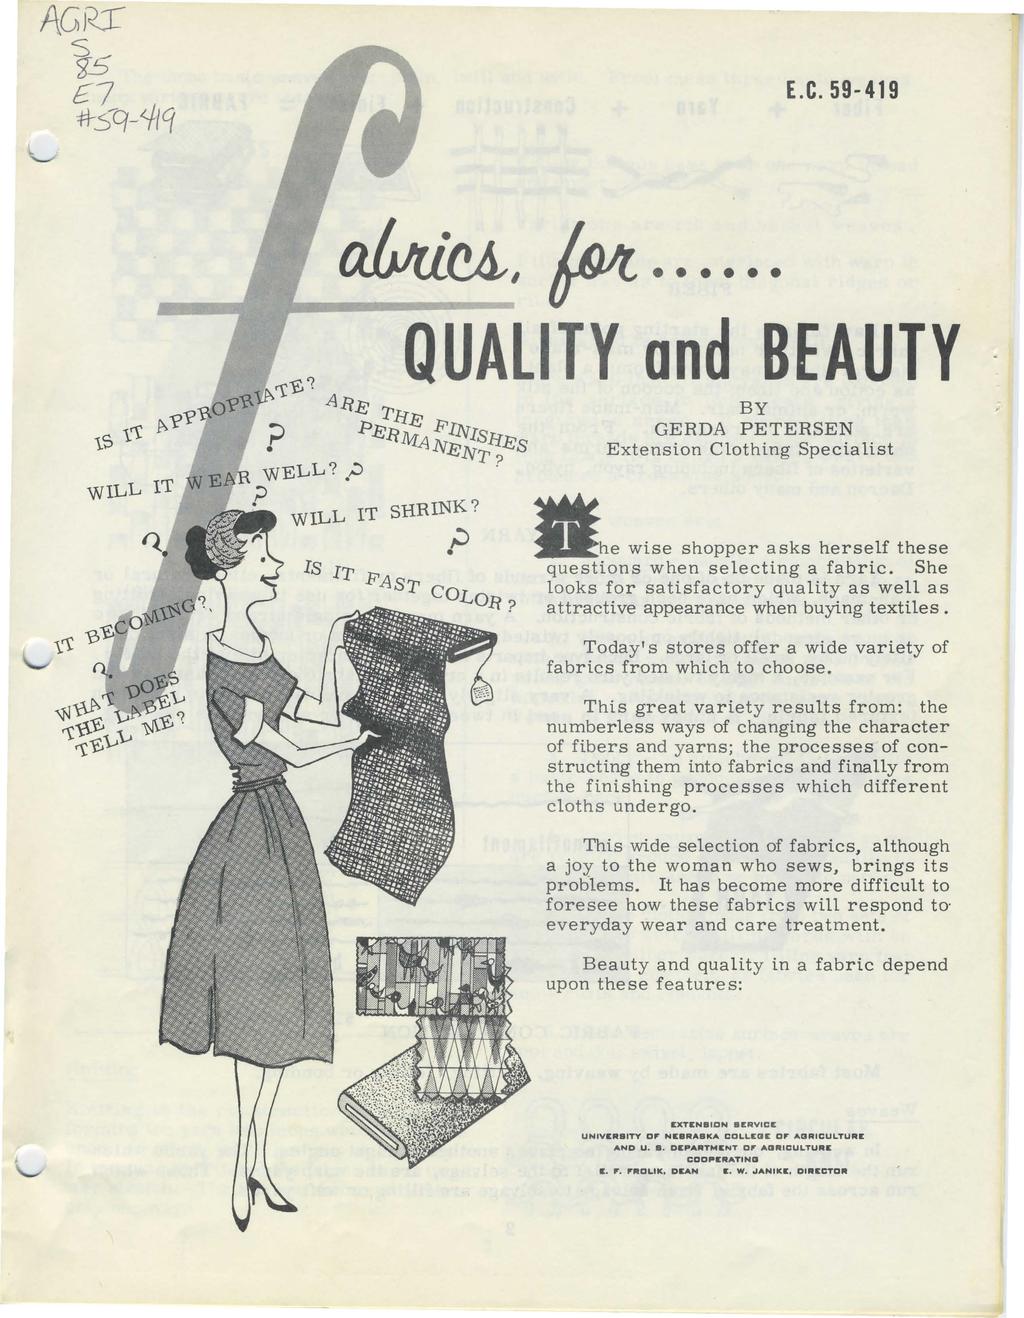 E.C. 59-419 ami~, ~.... QUALITY ond BEAUTY BY GERDA PETERSEN Extension Clothing Specialist WILL IT SHRINK? ;;.he wise shopper asks herself these questions when selecting a fabric.